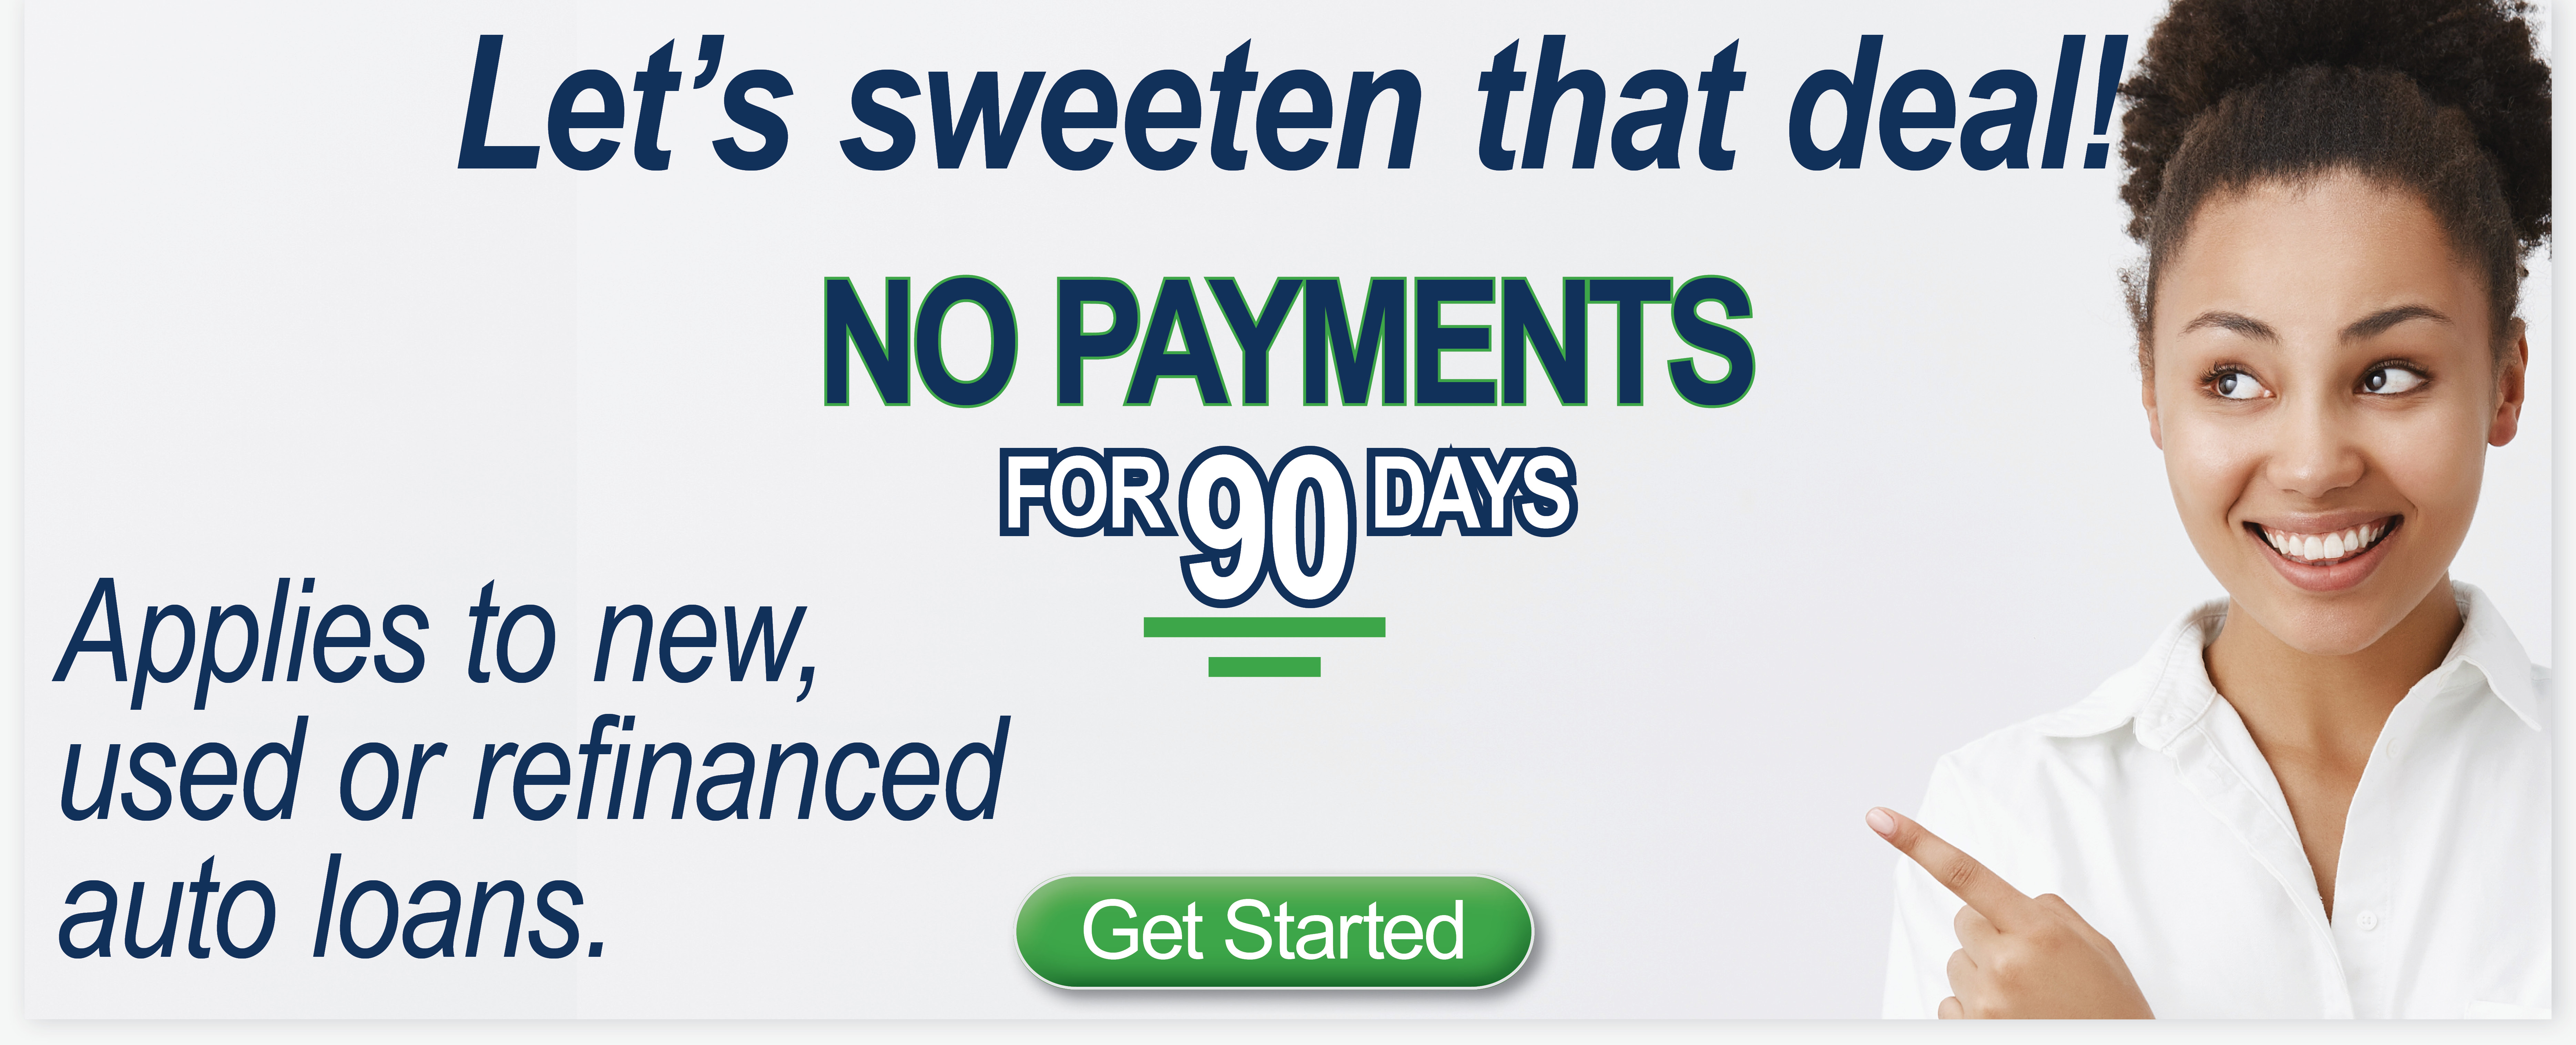 Auto Loans 90 Day No Pay